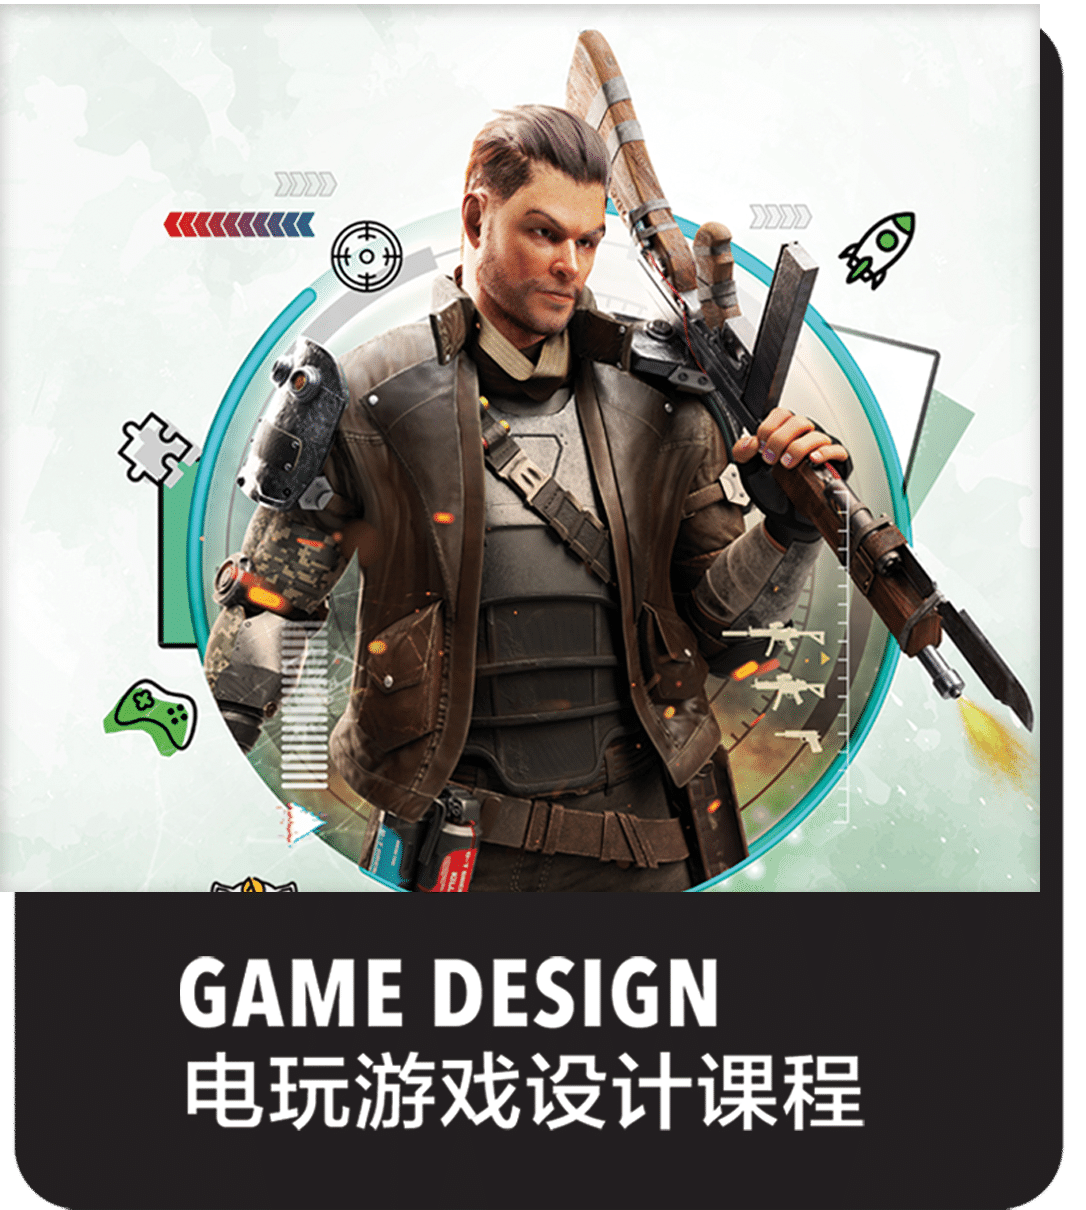 Game character modeling of a man with a jacket, a left mechanical arm, and a right hand holding a wooden shotgun